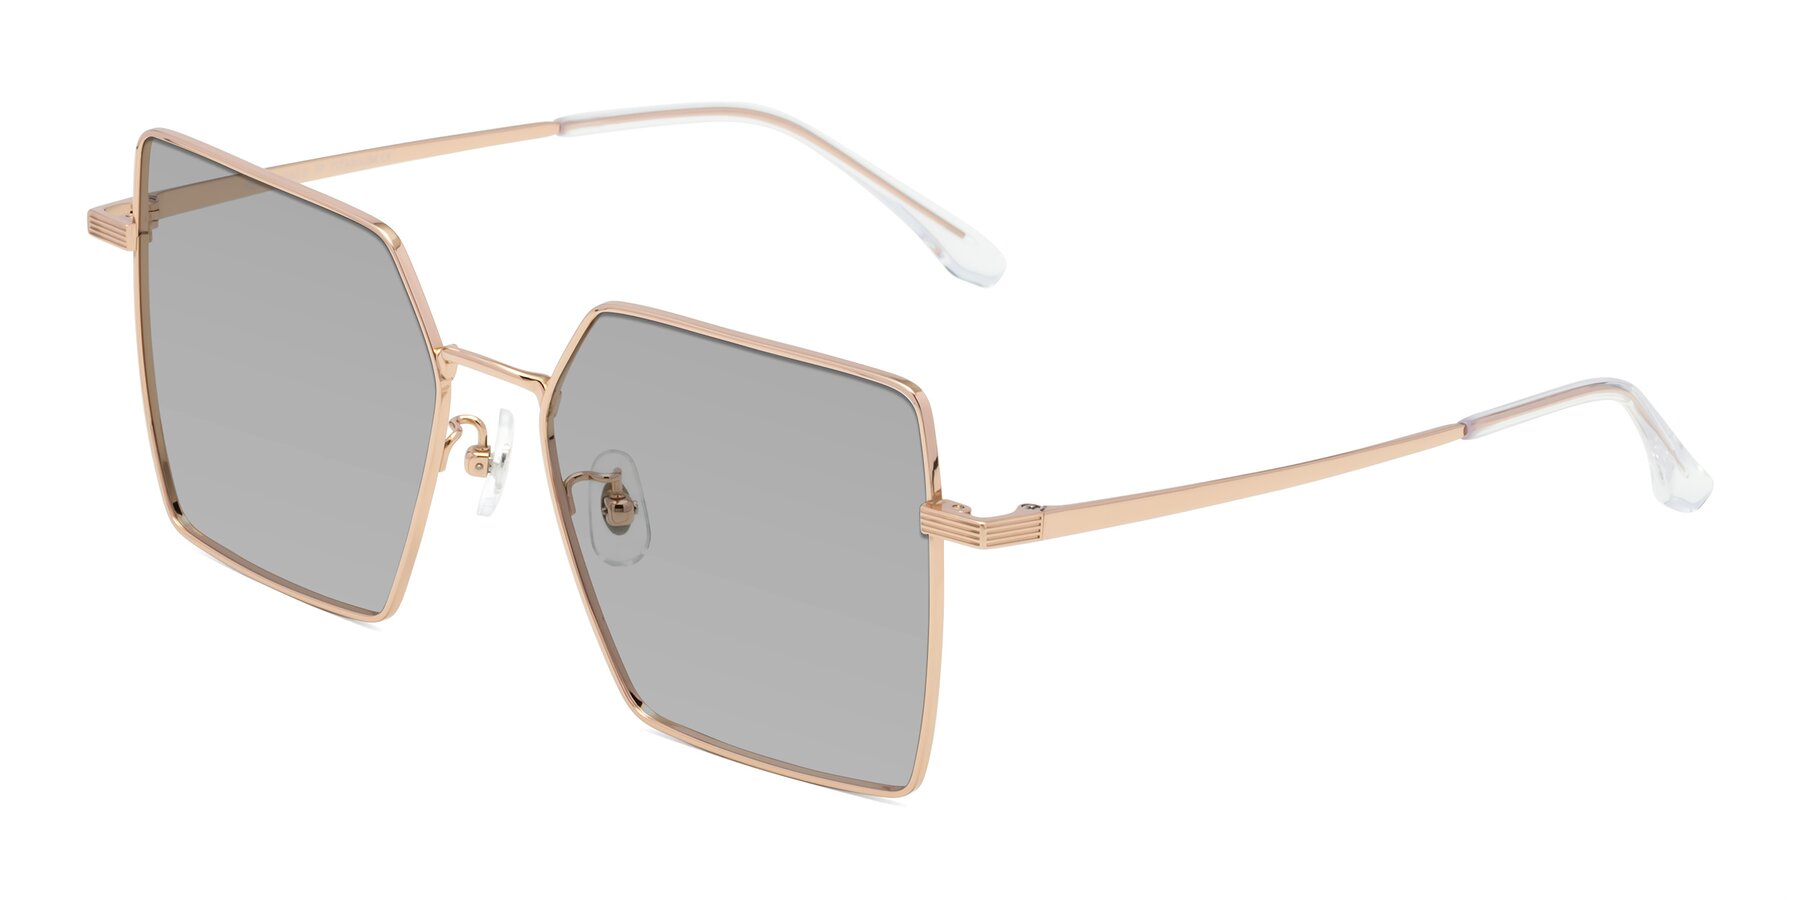 Angle of La Villa in Rose Gold with Light Gray Tinted Lenses